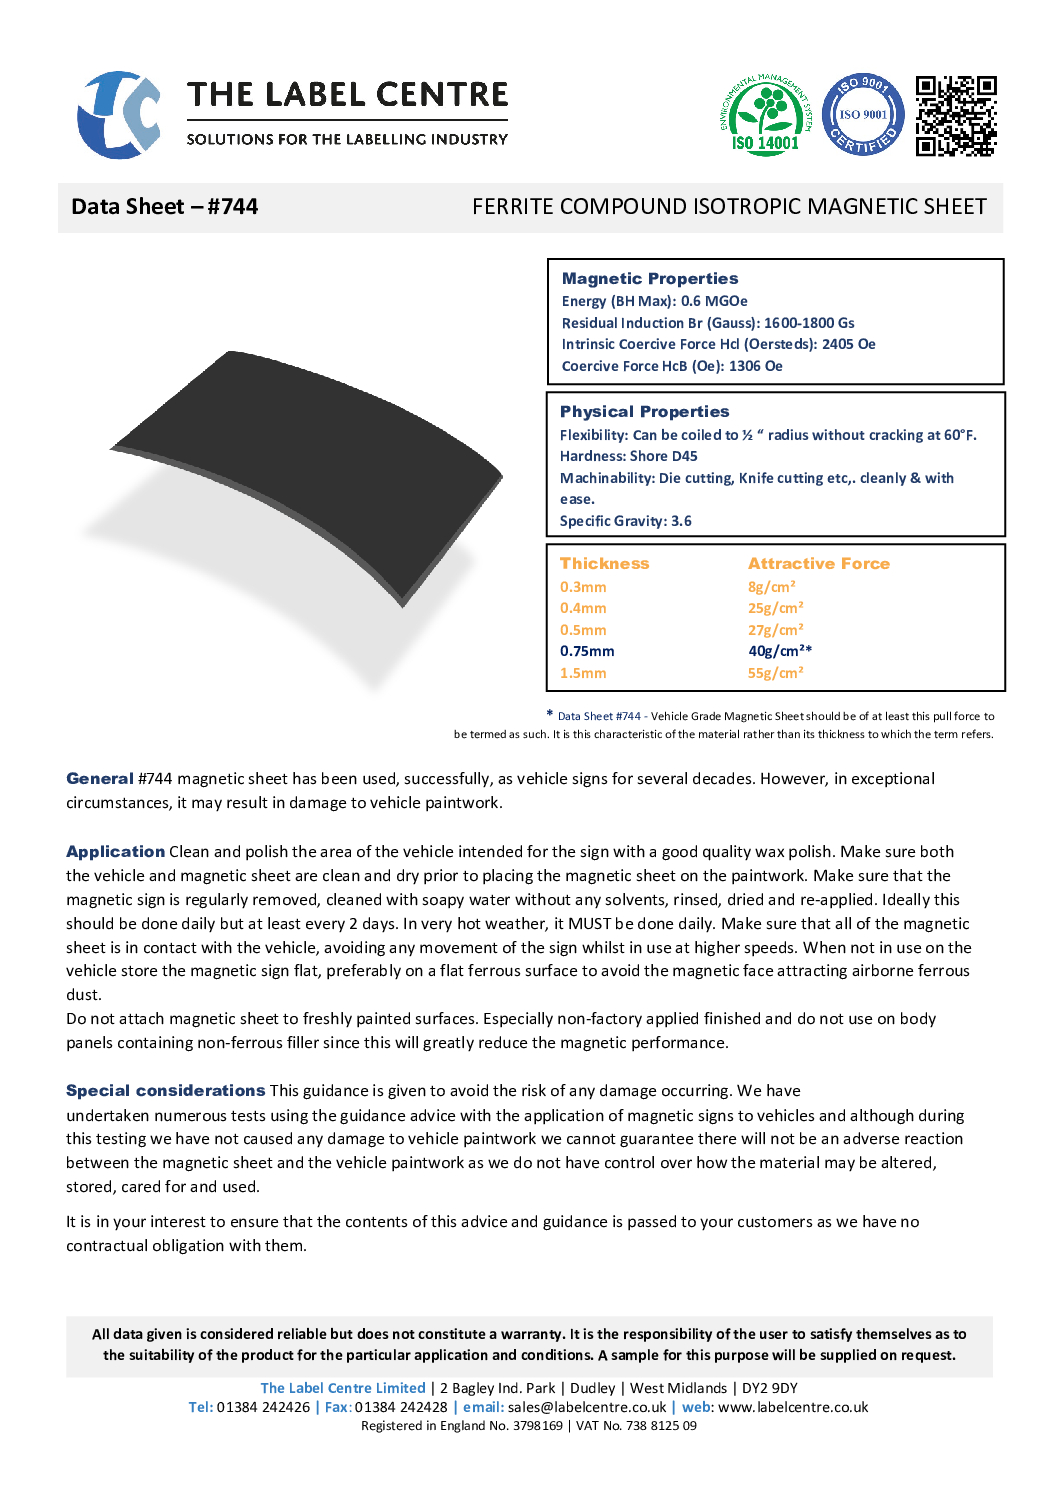 744_Ferrite-Compound-Isotropic-Magnetic-Sheet.pdf